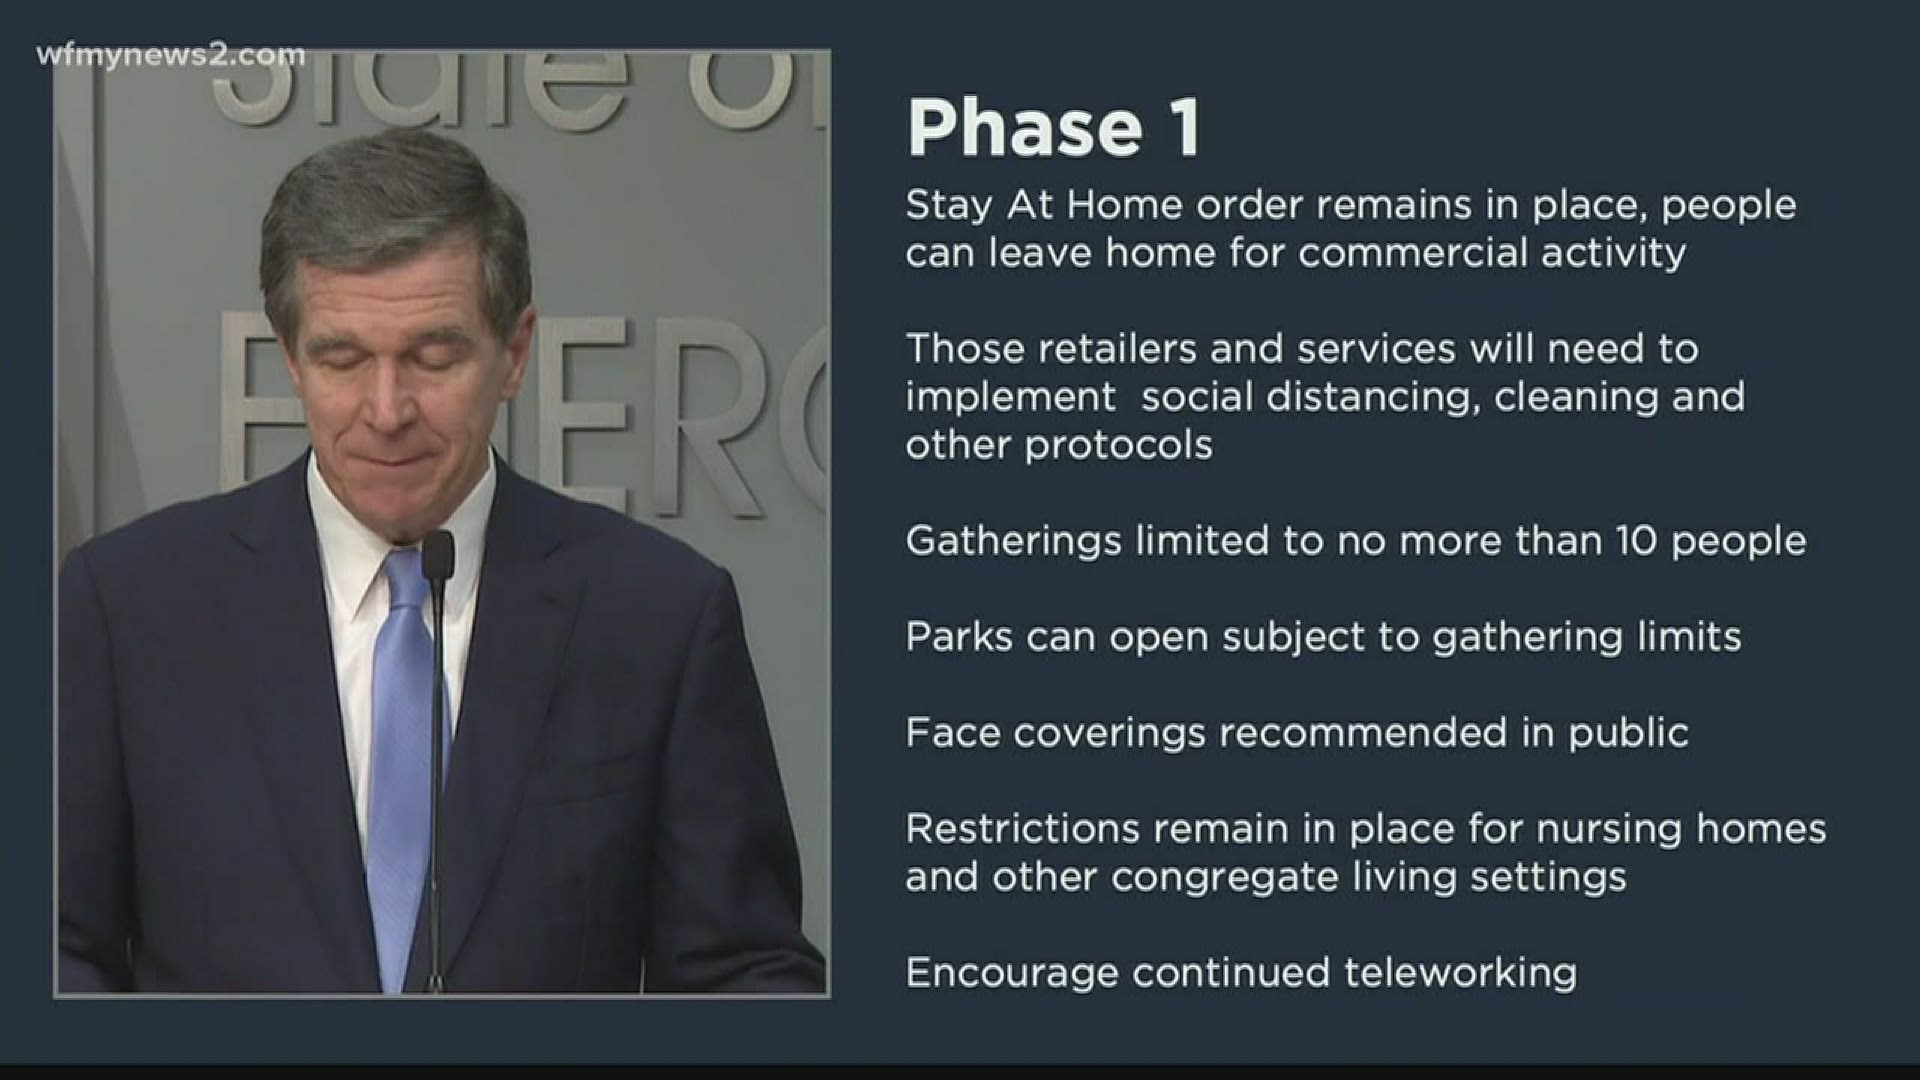 Governor Cooper said we won't go back to the way we lived in January or February anytime soon. He announced a plan to ease reopening North Carolina's economy.